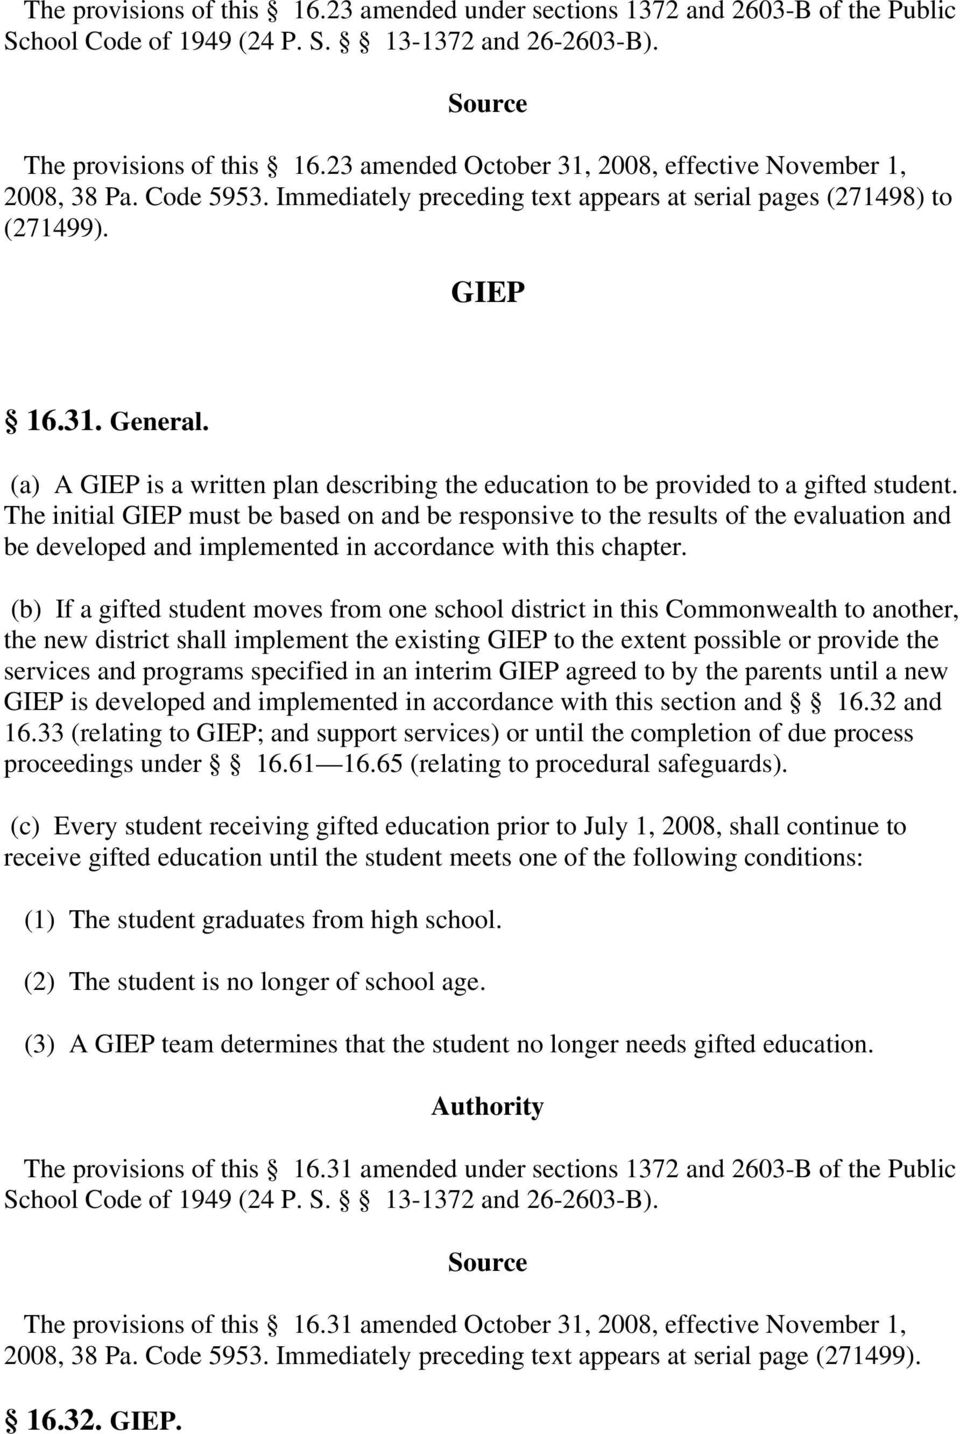 (a) A GIEP is a written plan describing the education to be provided to a gifted student.